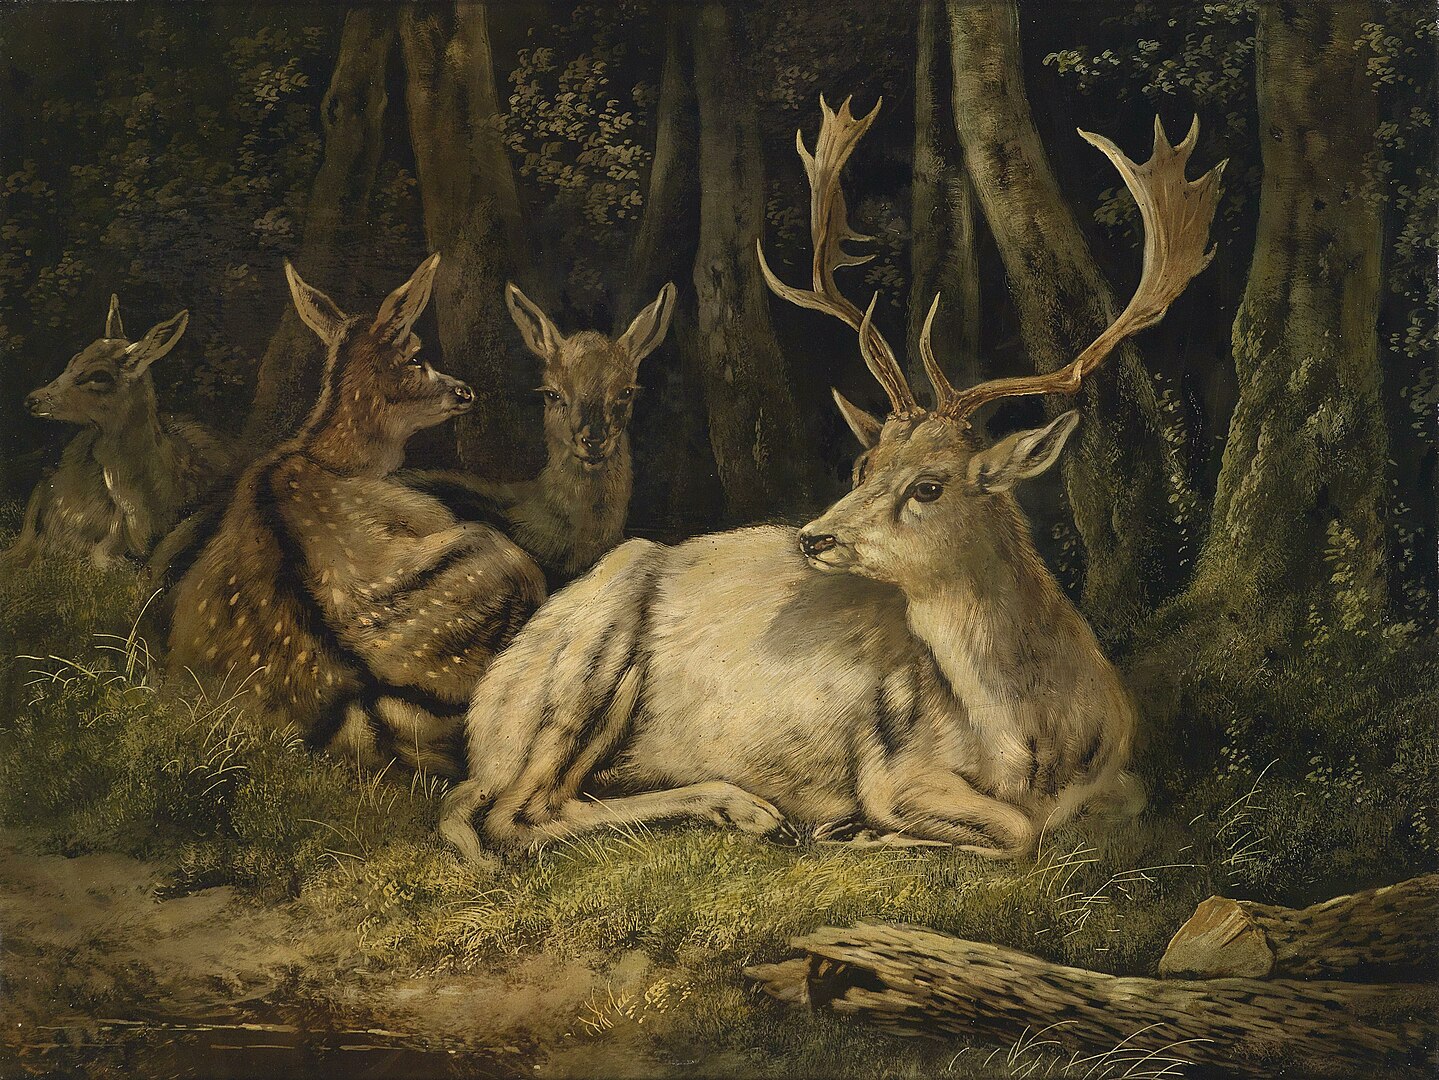 A group of deer are seen in a darkened forest resting on the ground.